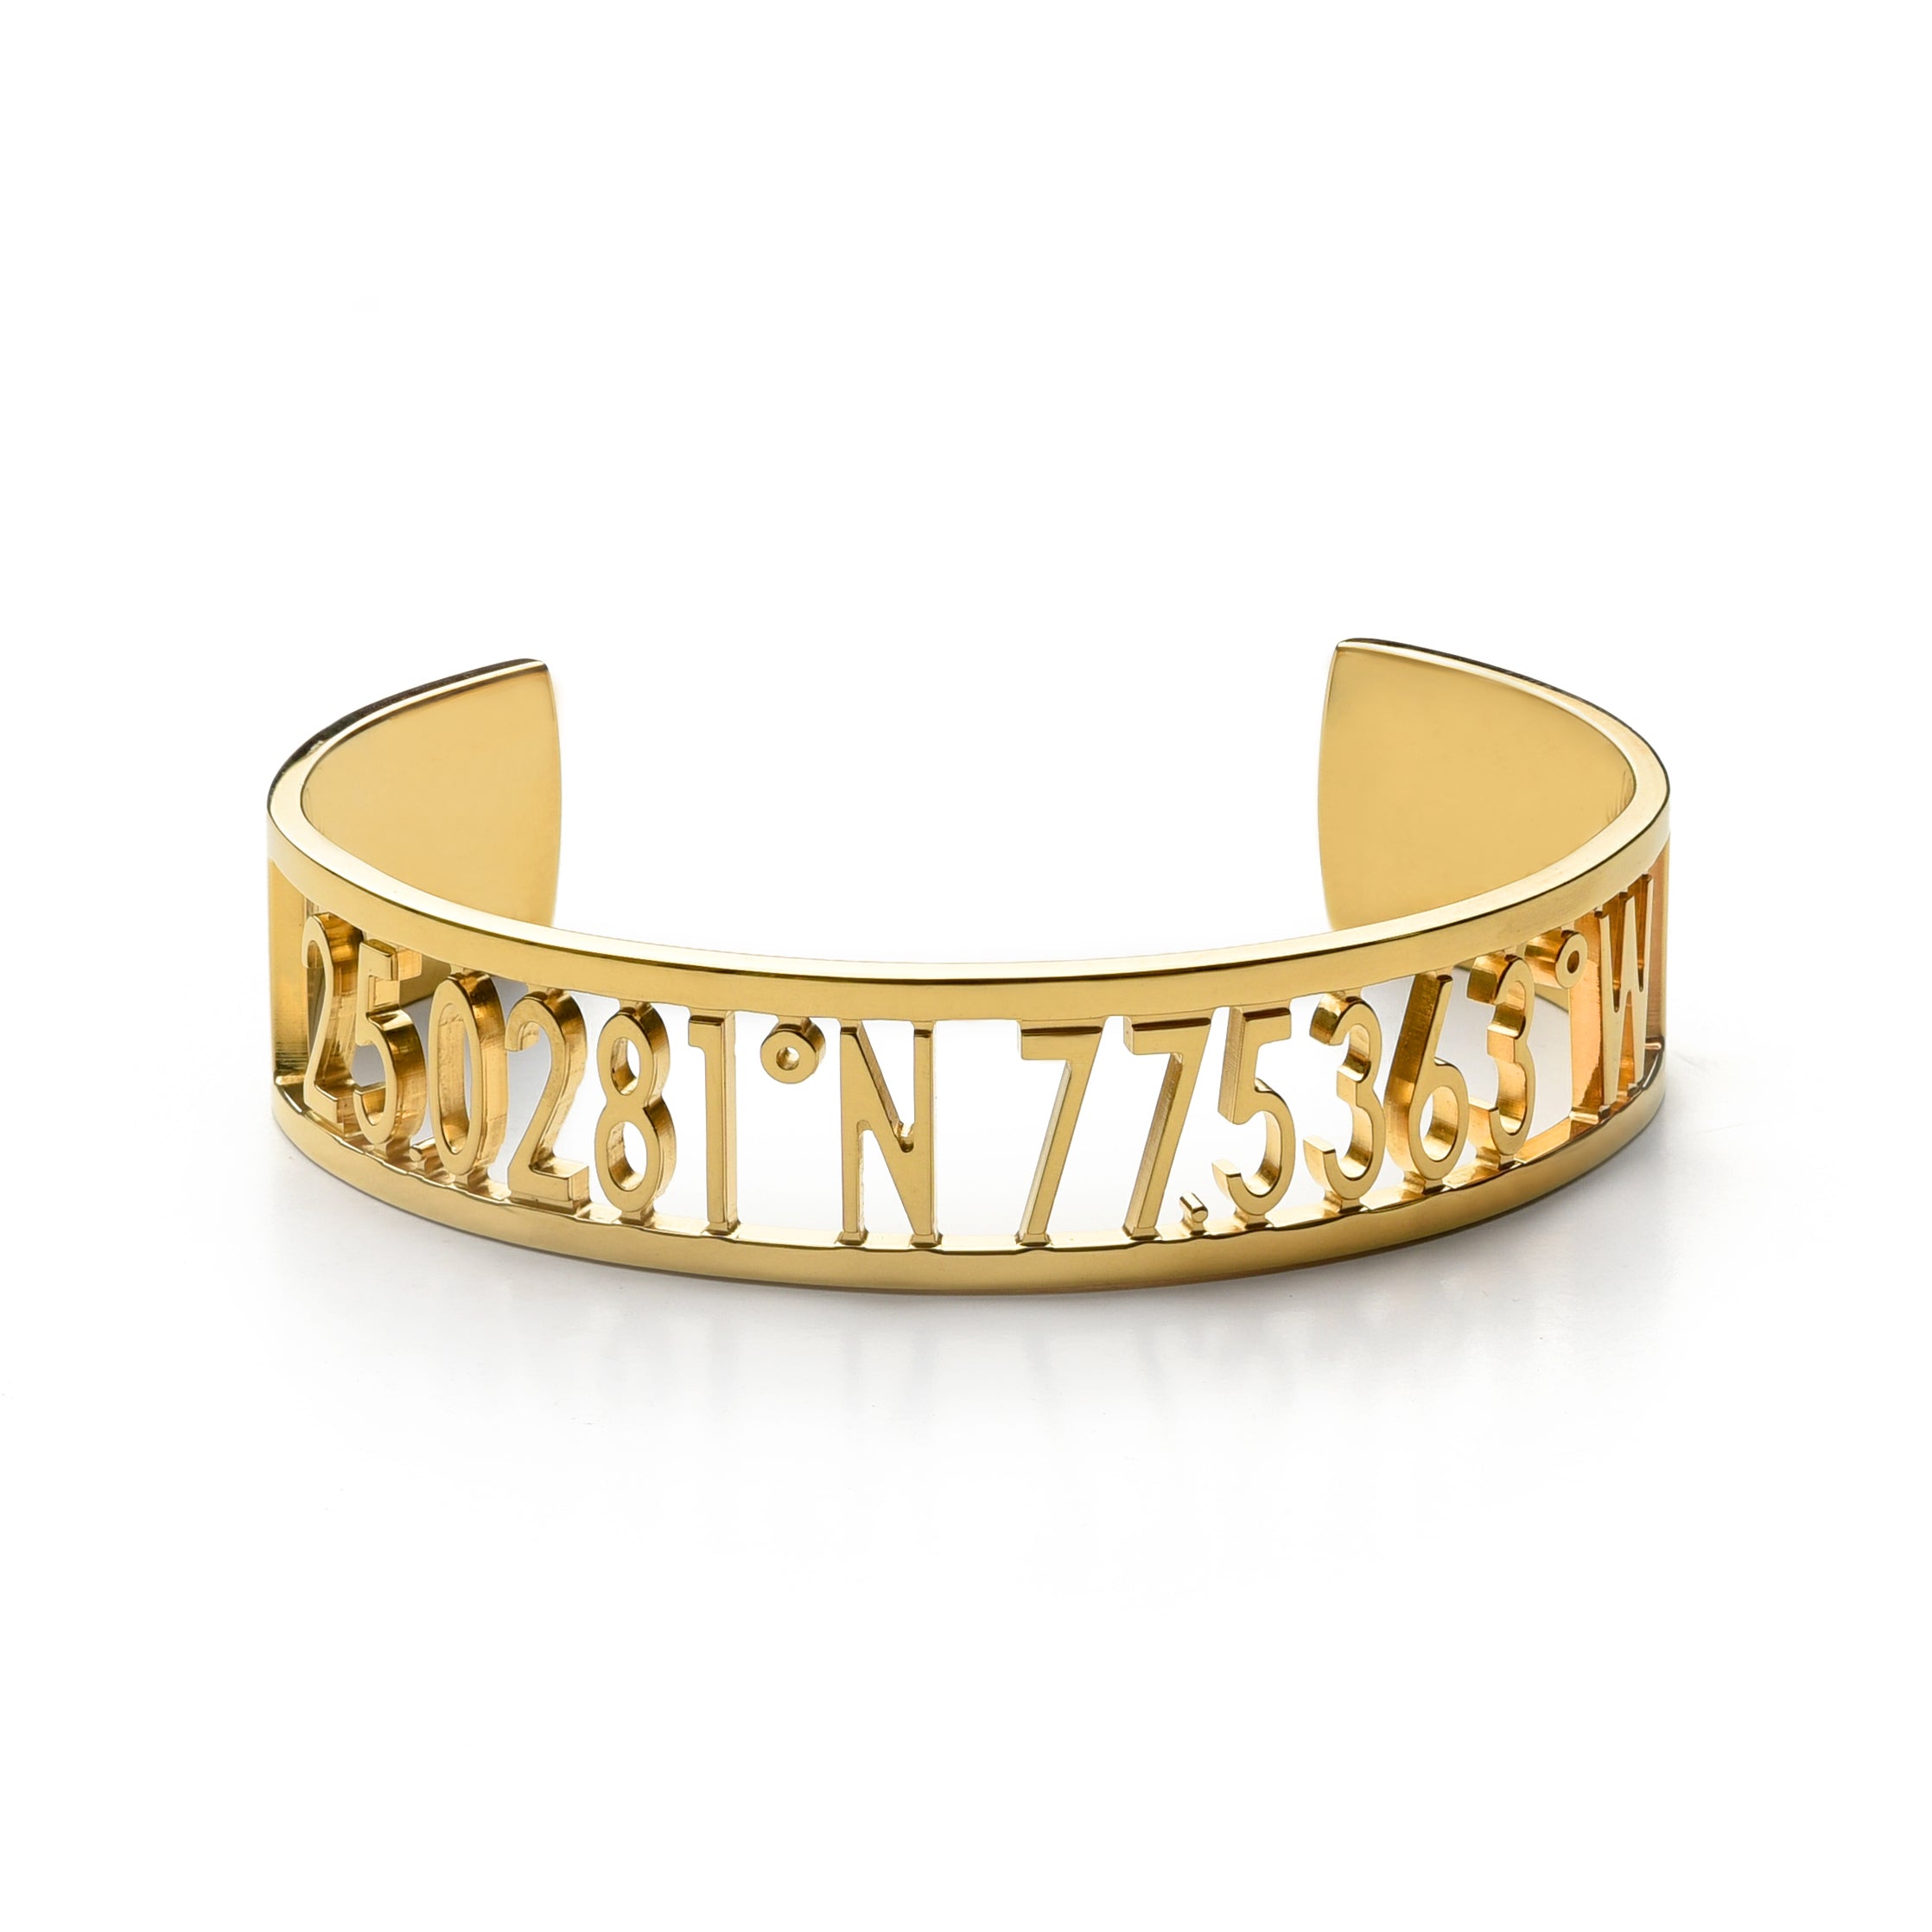 A thick gold cuff bracelet with carved out inscription